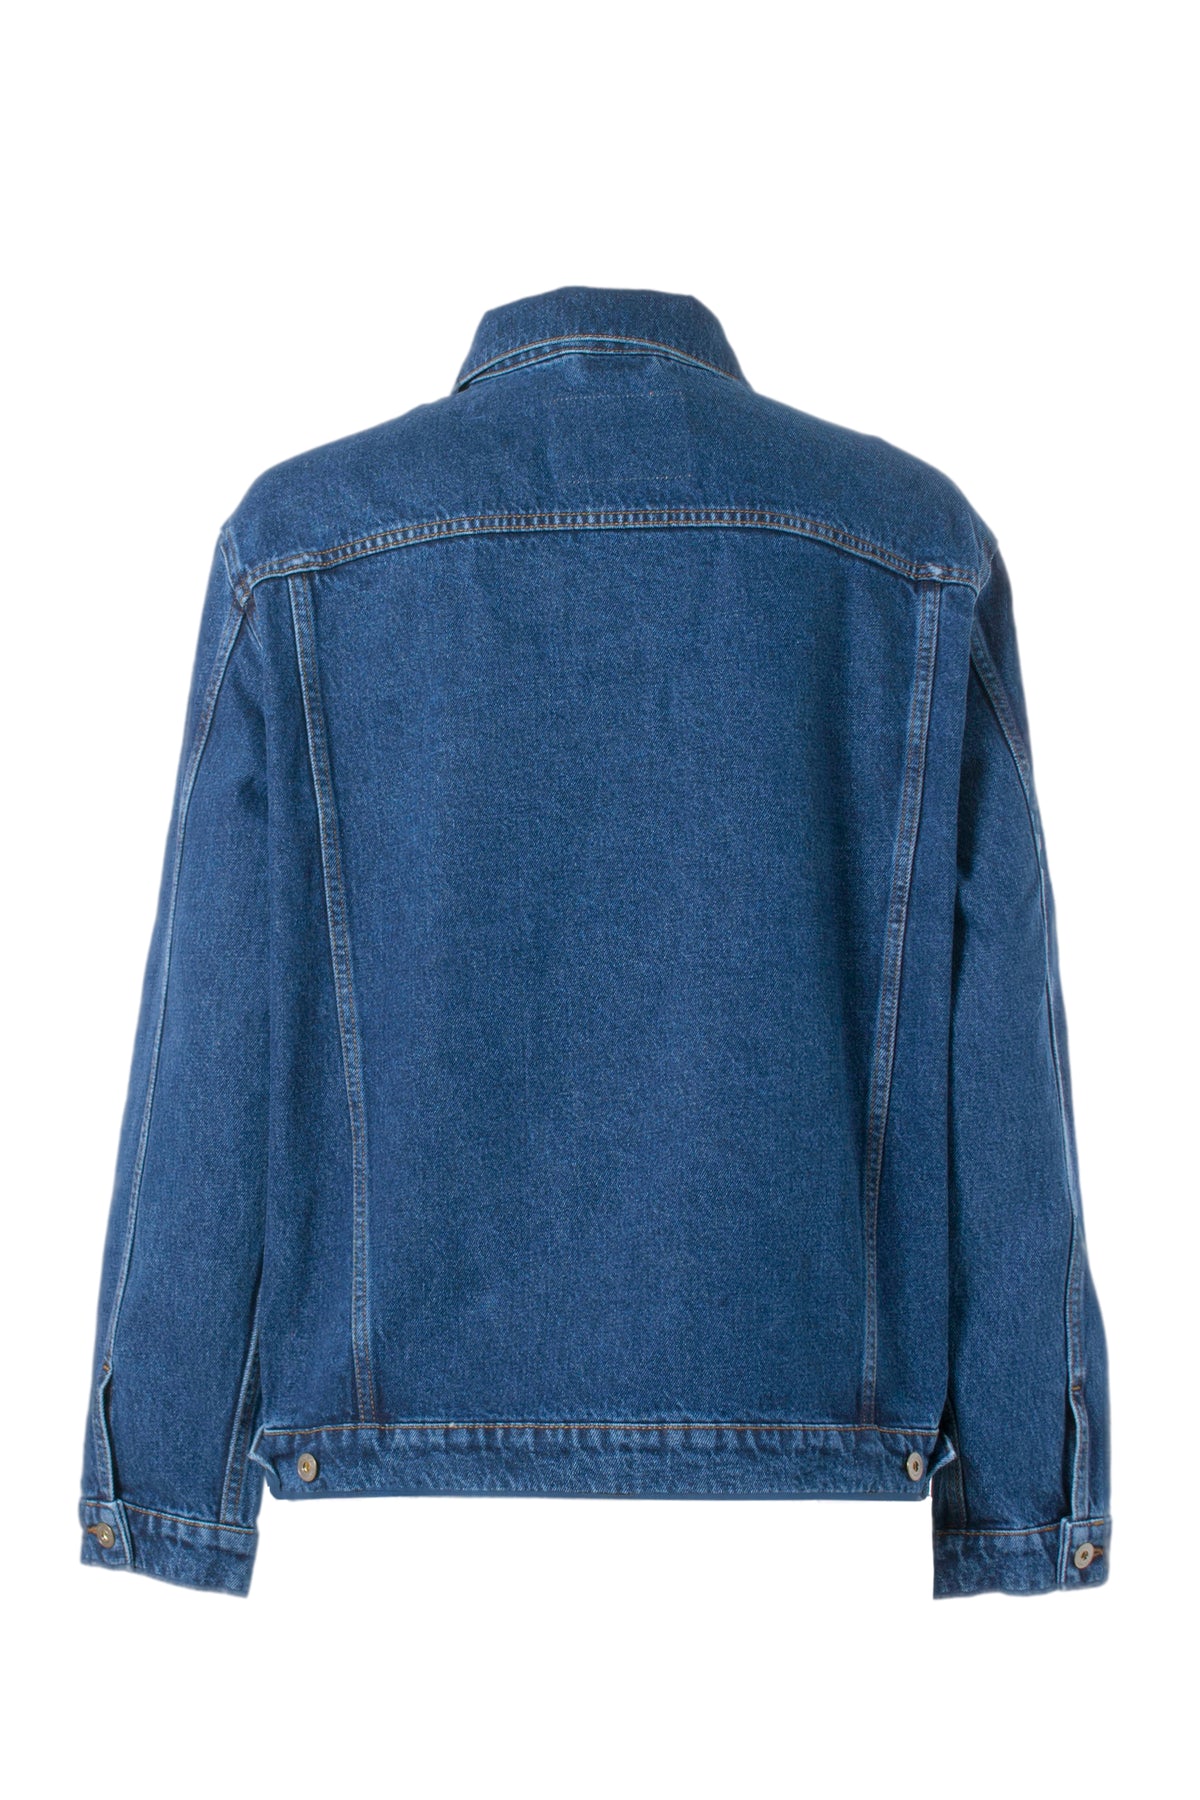 CLASSIC WIRE DENIM JACKET / NVY